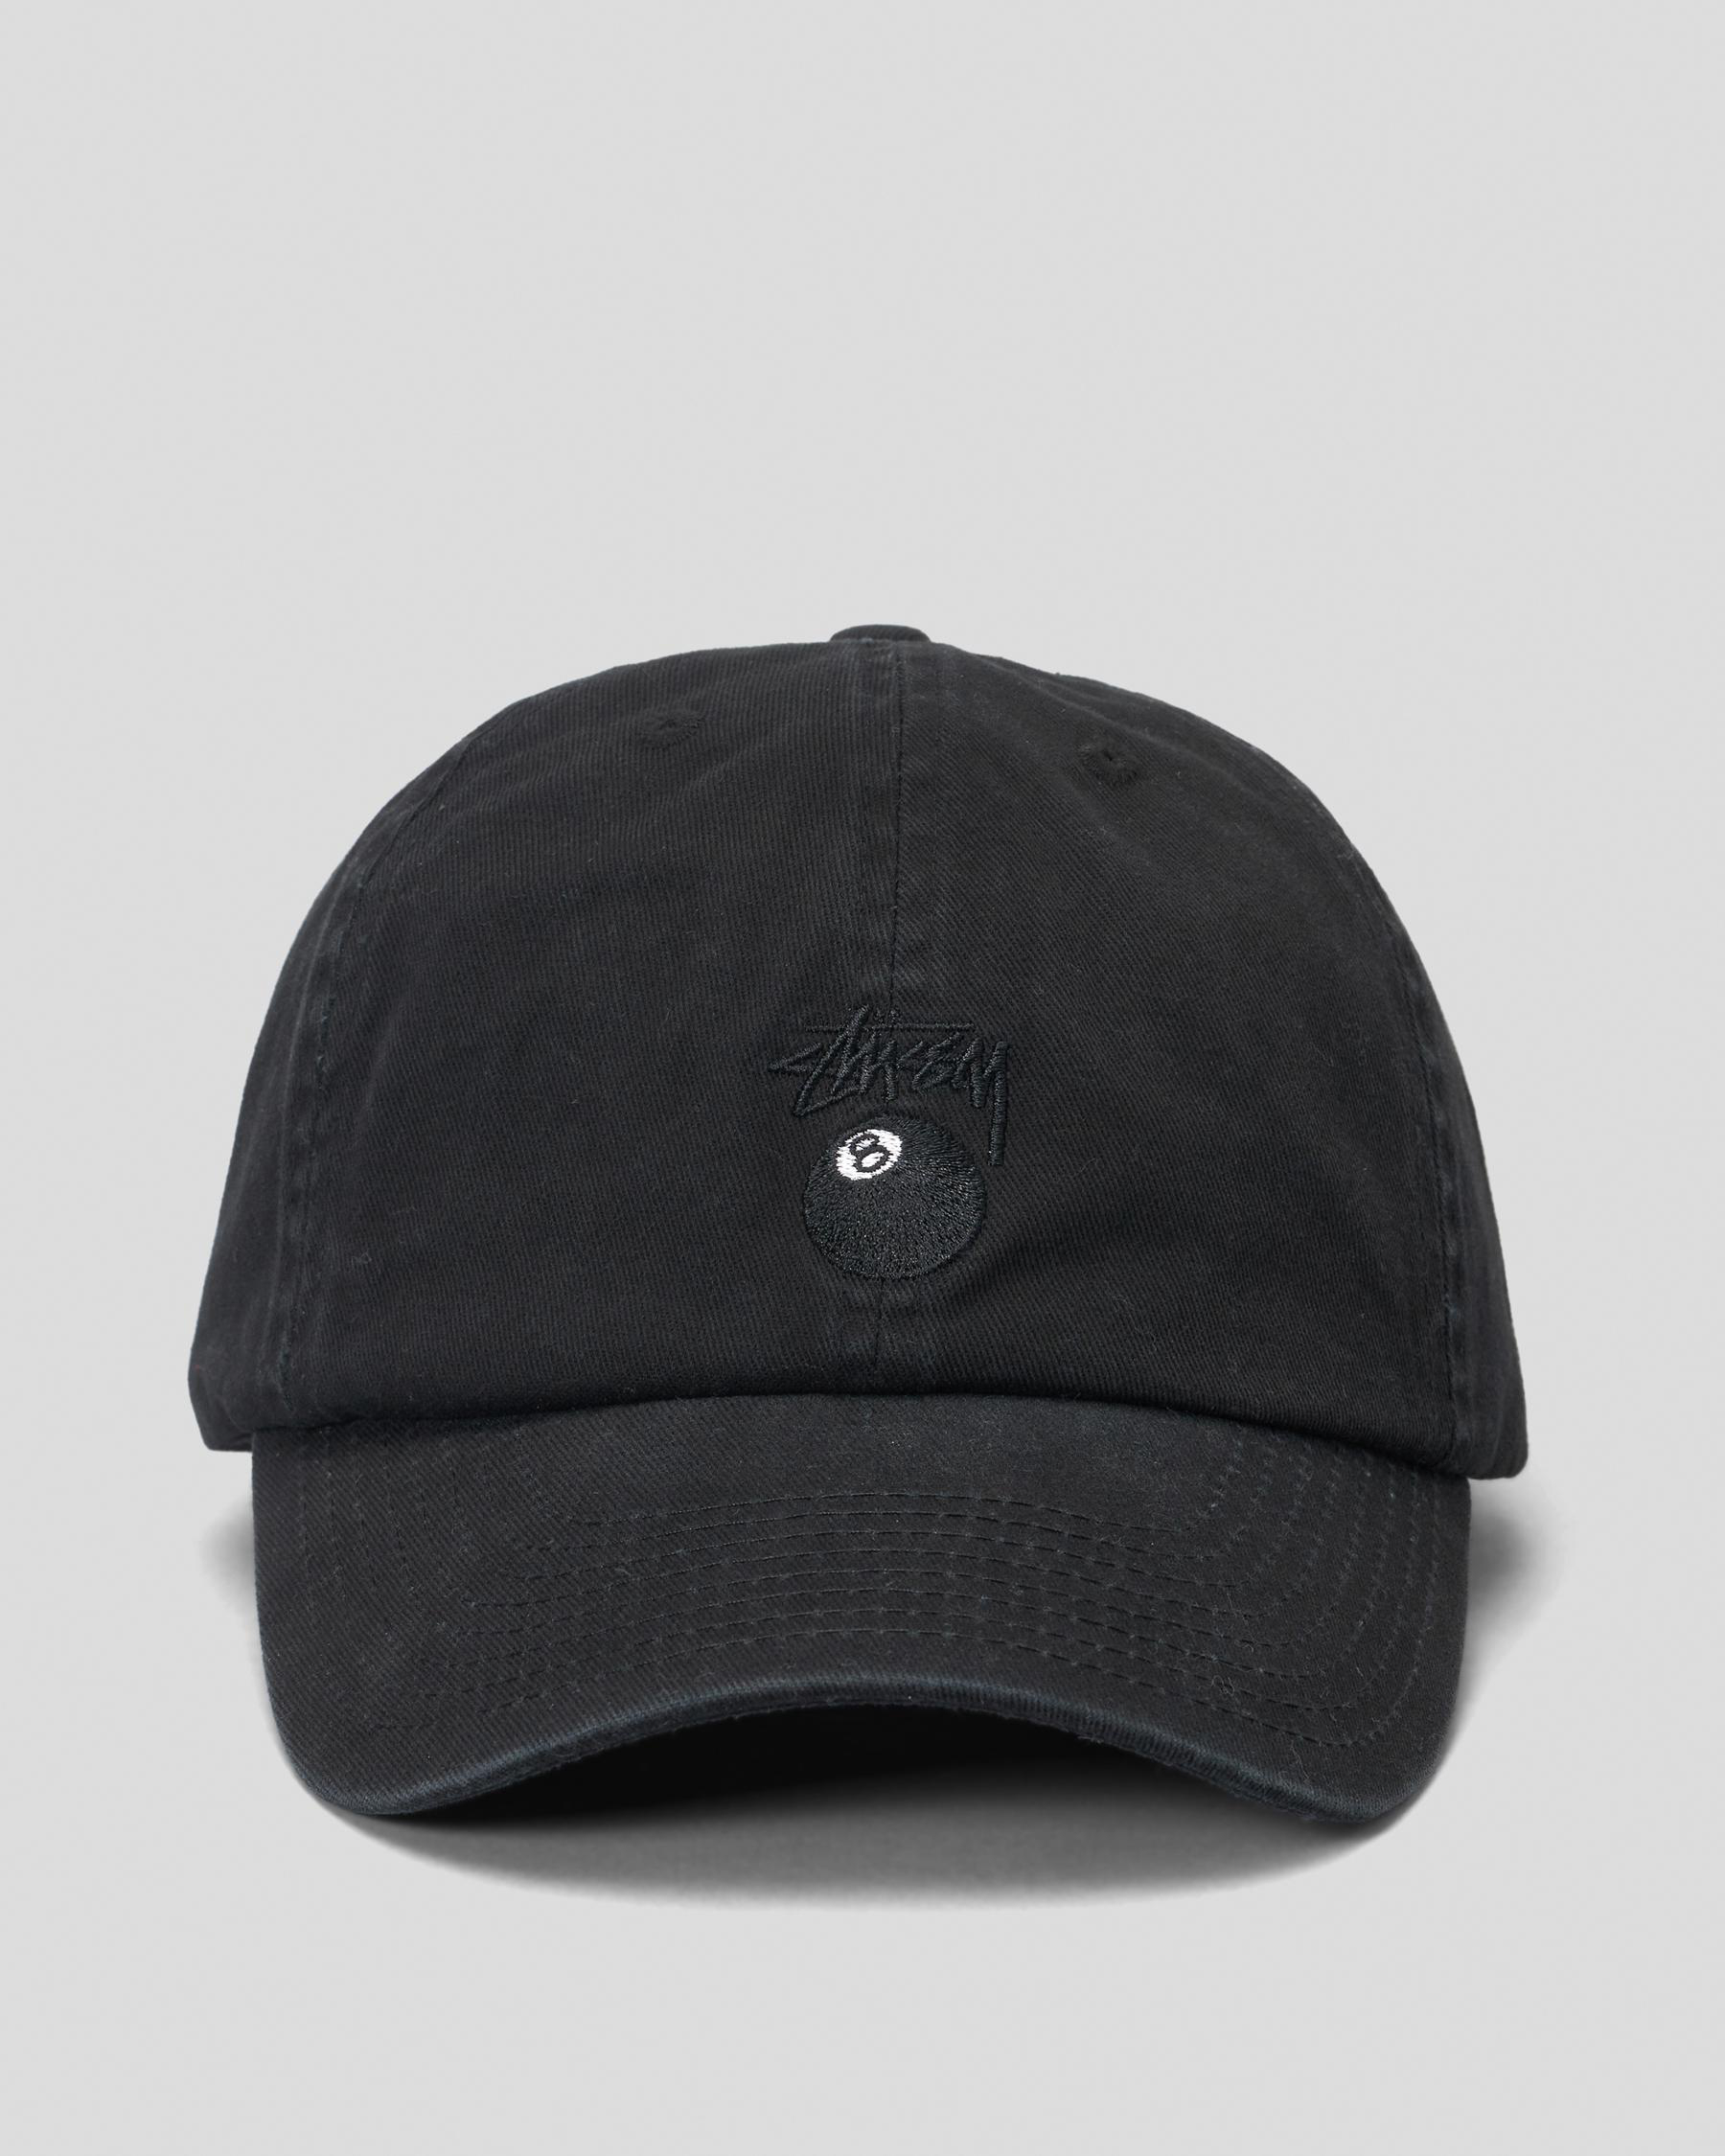 Shop Stussy Stock 8 Ball Low Pro Cap In Black - Fast Shipping & Easy ...